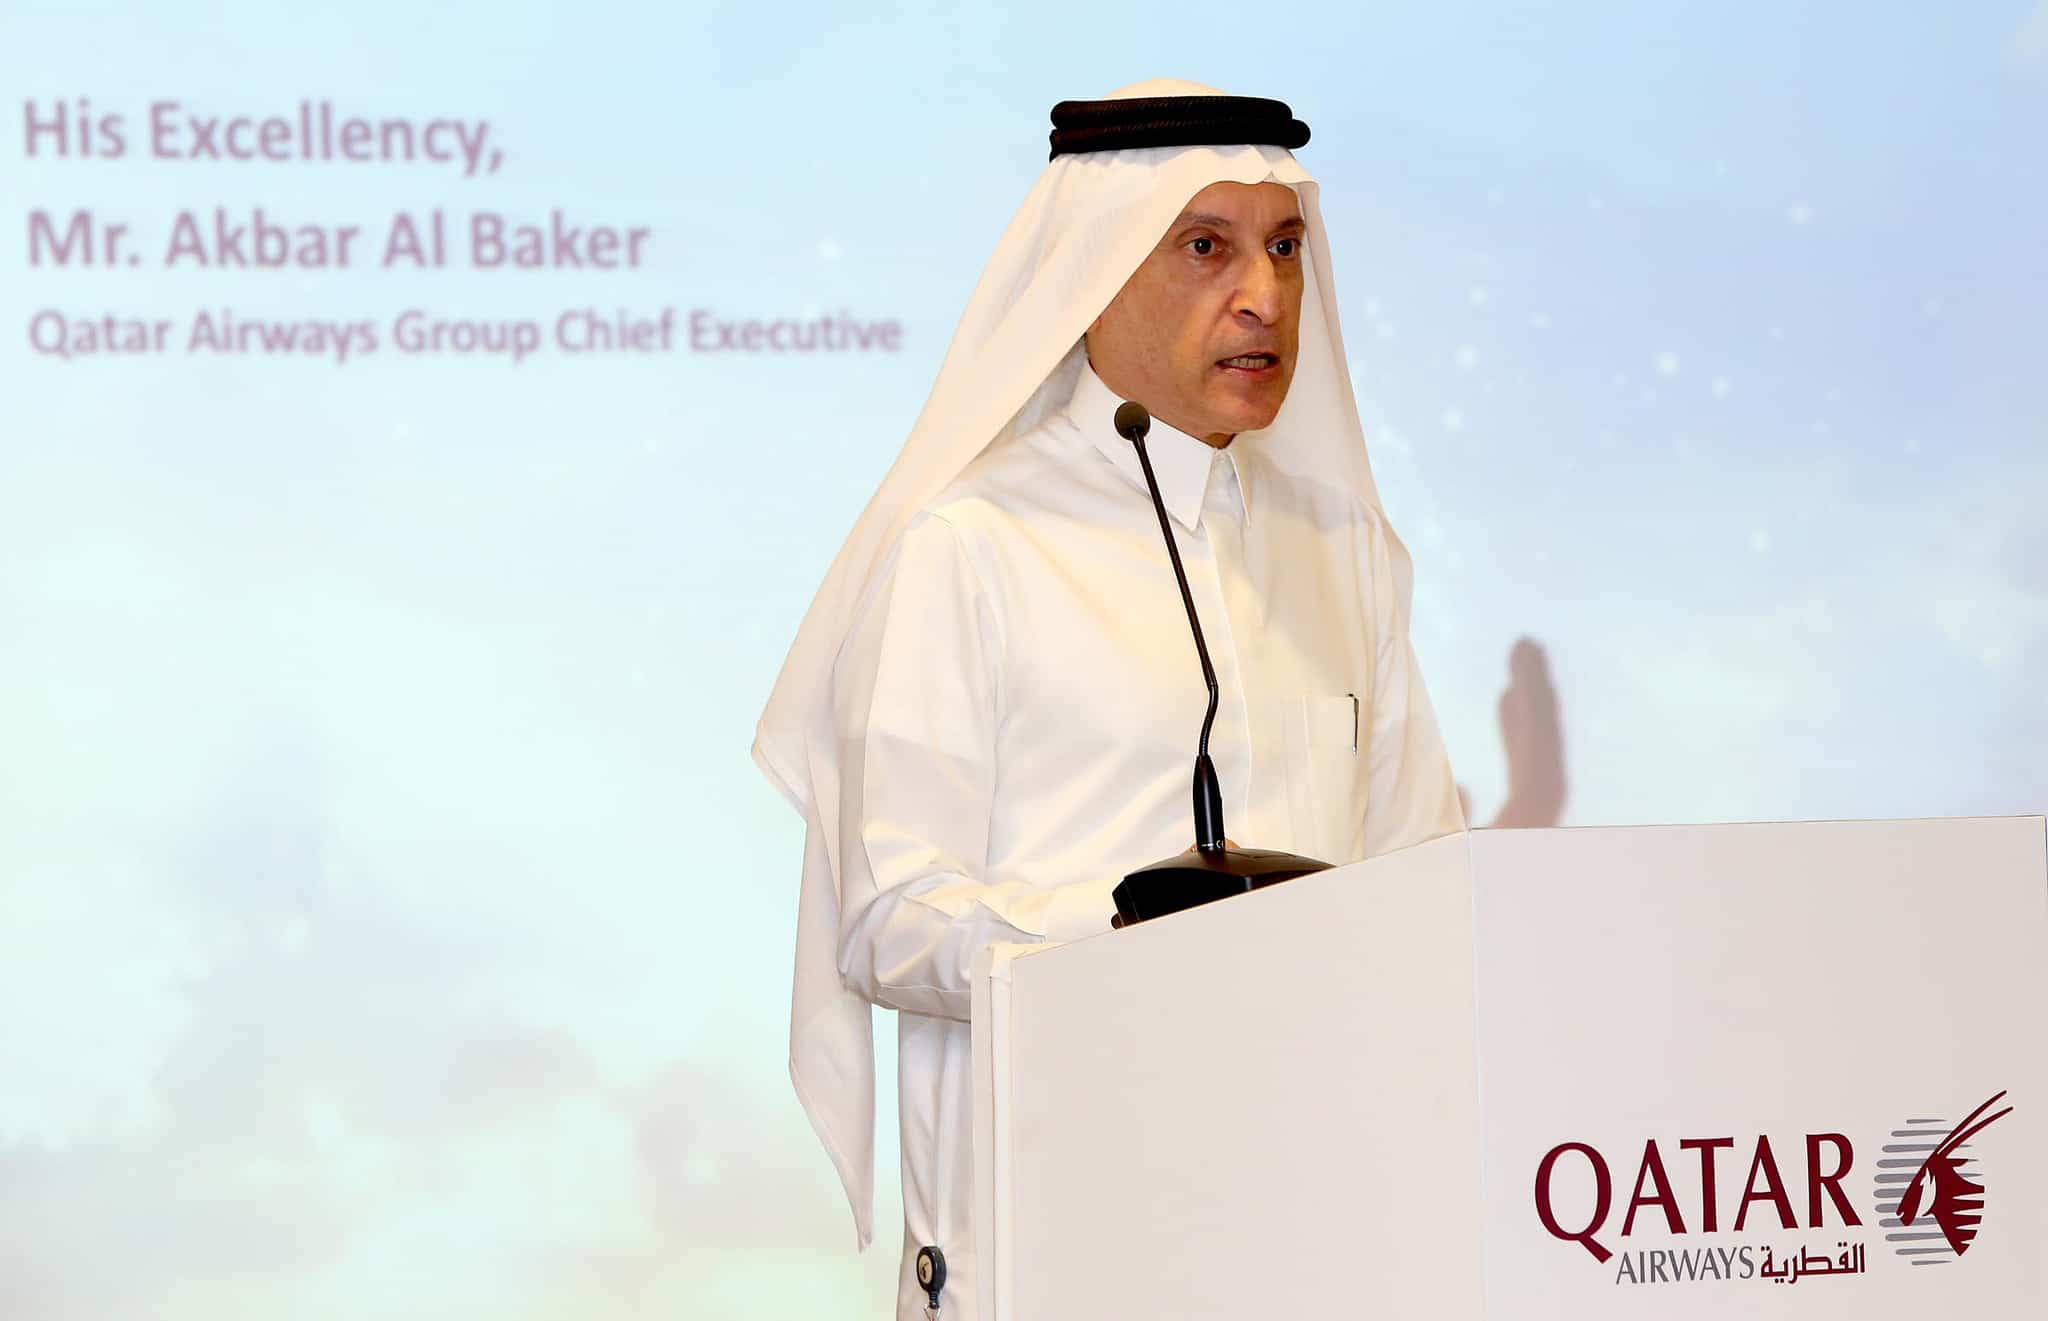 Qatar Airways to host events to raise mental health awareness